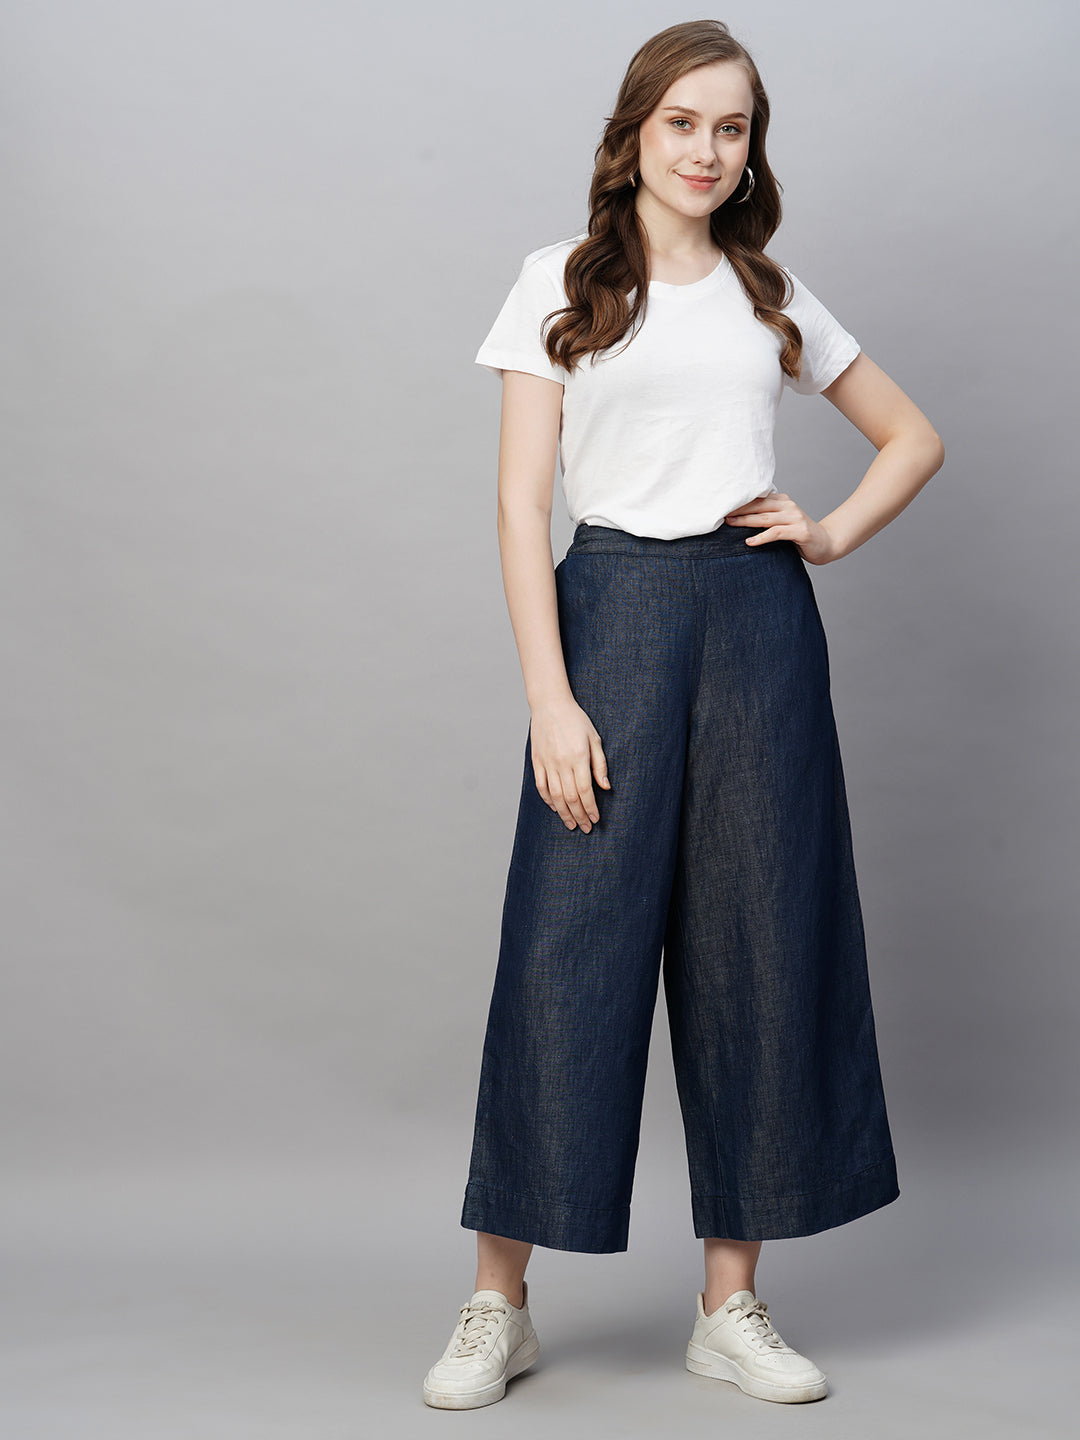 Denim Culottes Dressed Up and Down